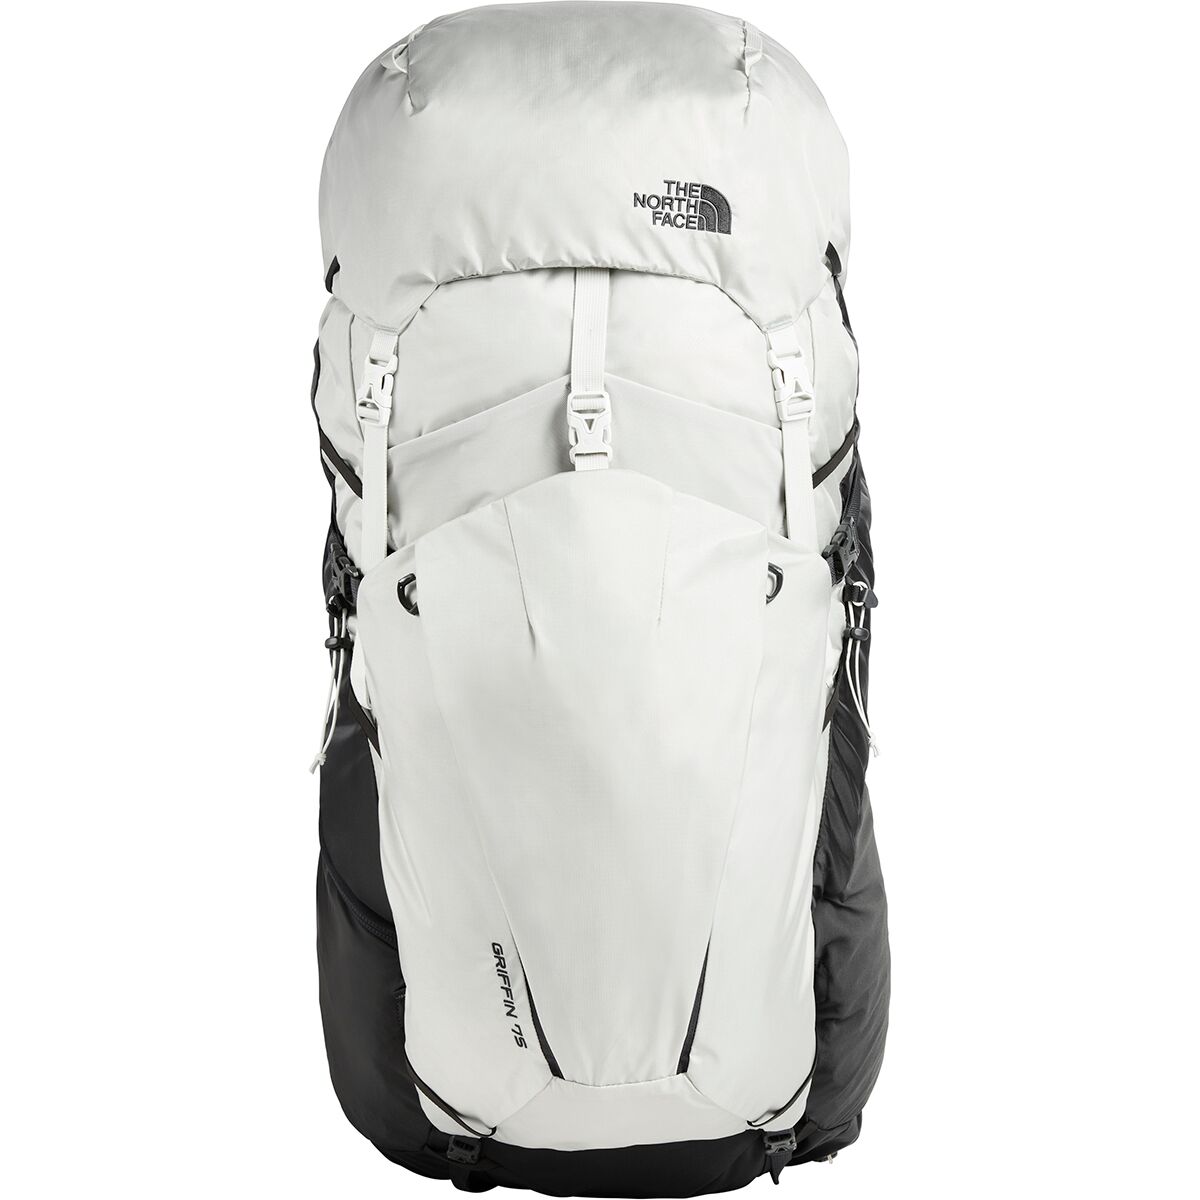 The North Face Griffin 75L Backpack - Hike & Camp